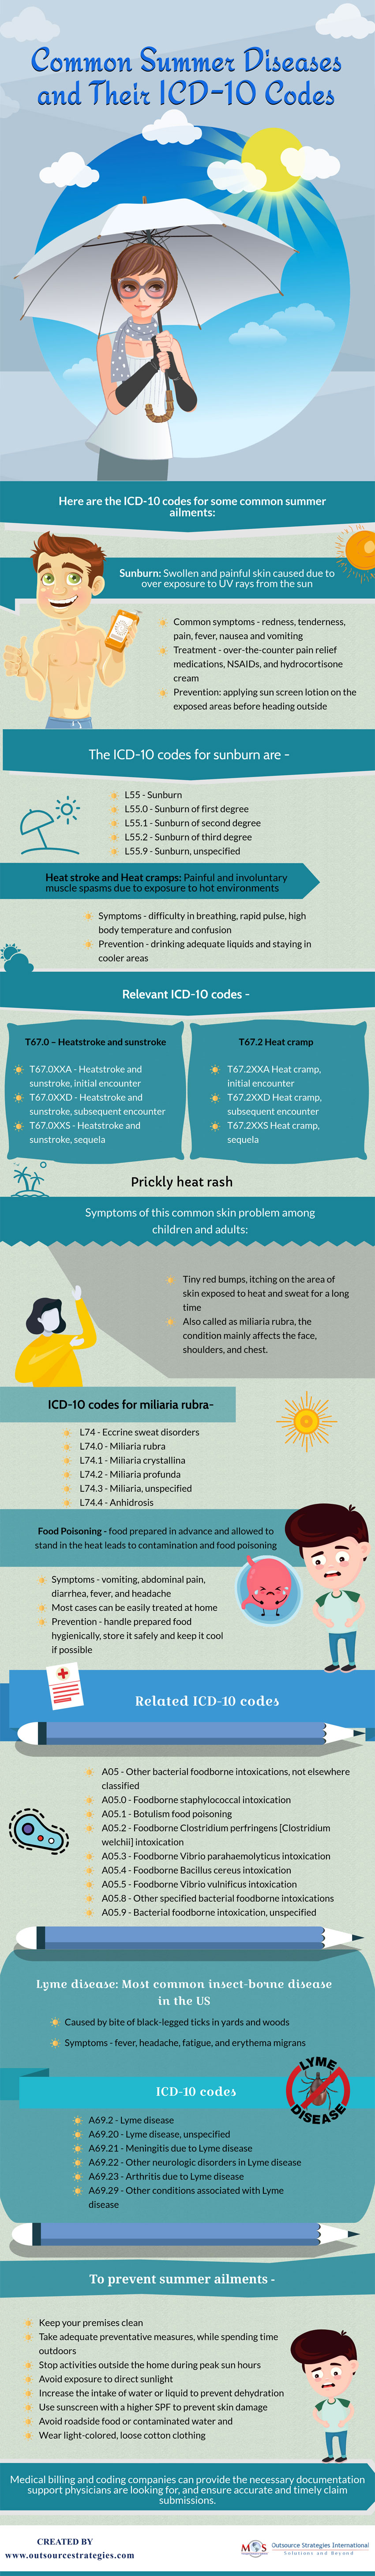 Common Summer Diseases and Their ICD-10 Codes